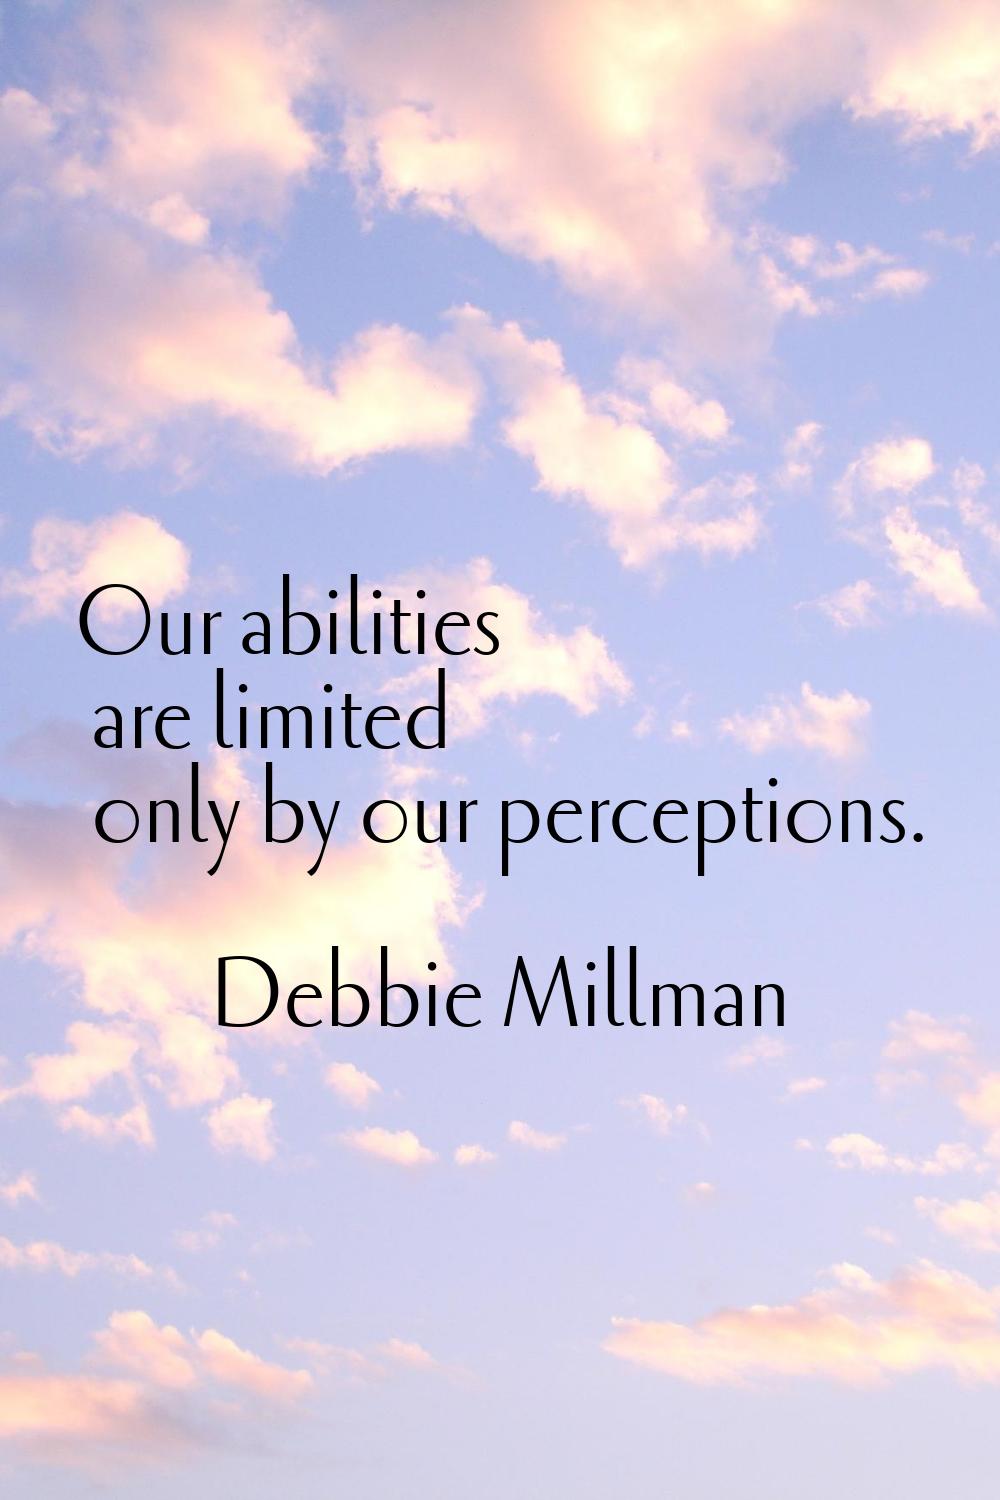 Our abilities are limited only by our perceptions.